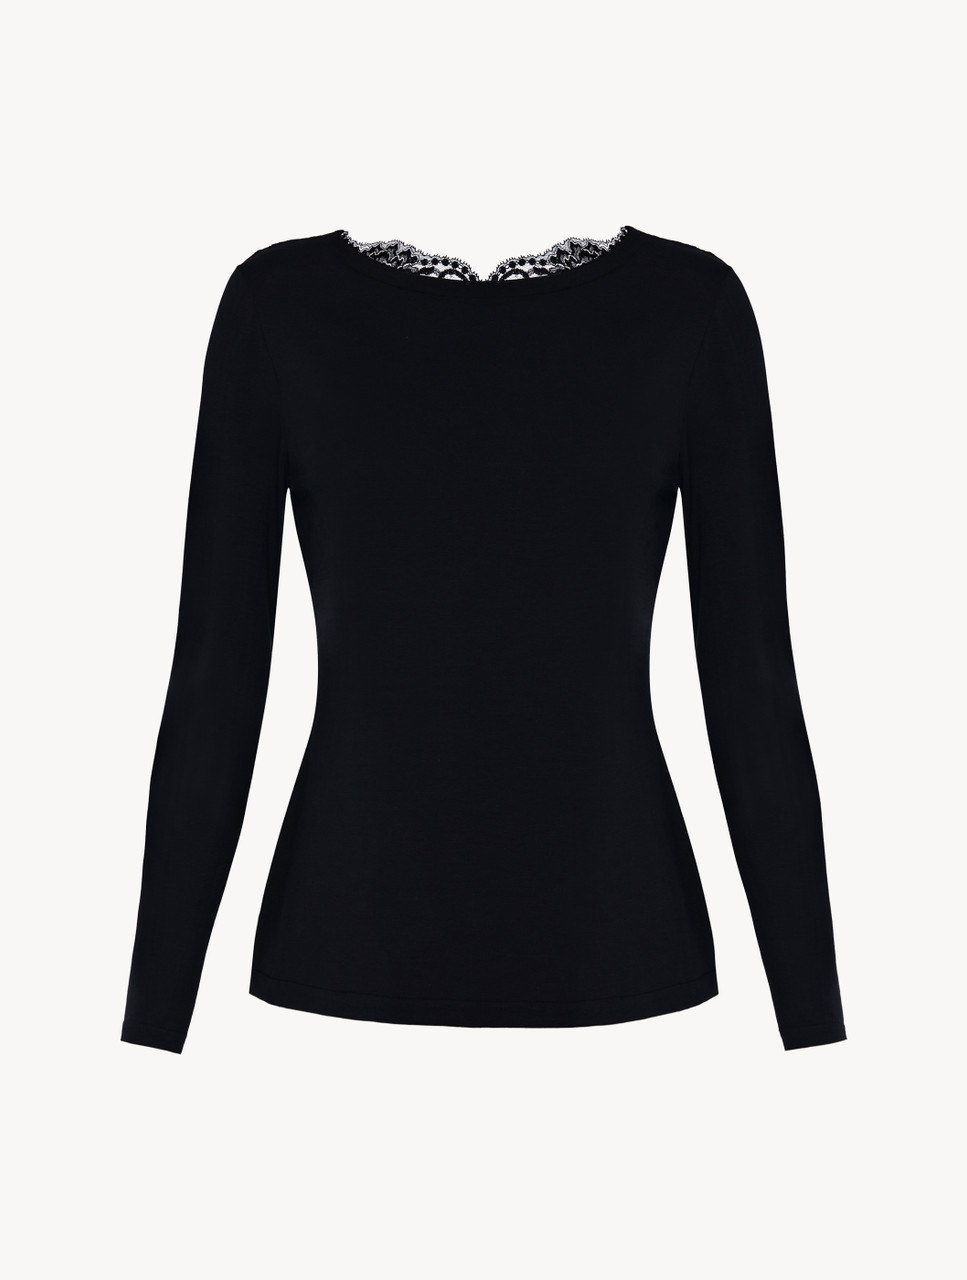 Black cotton long-sleeved top